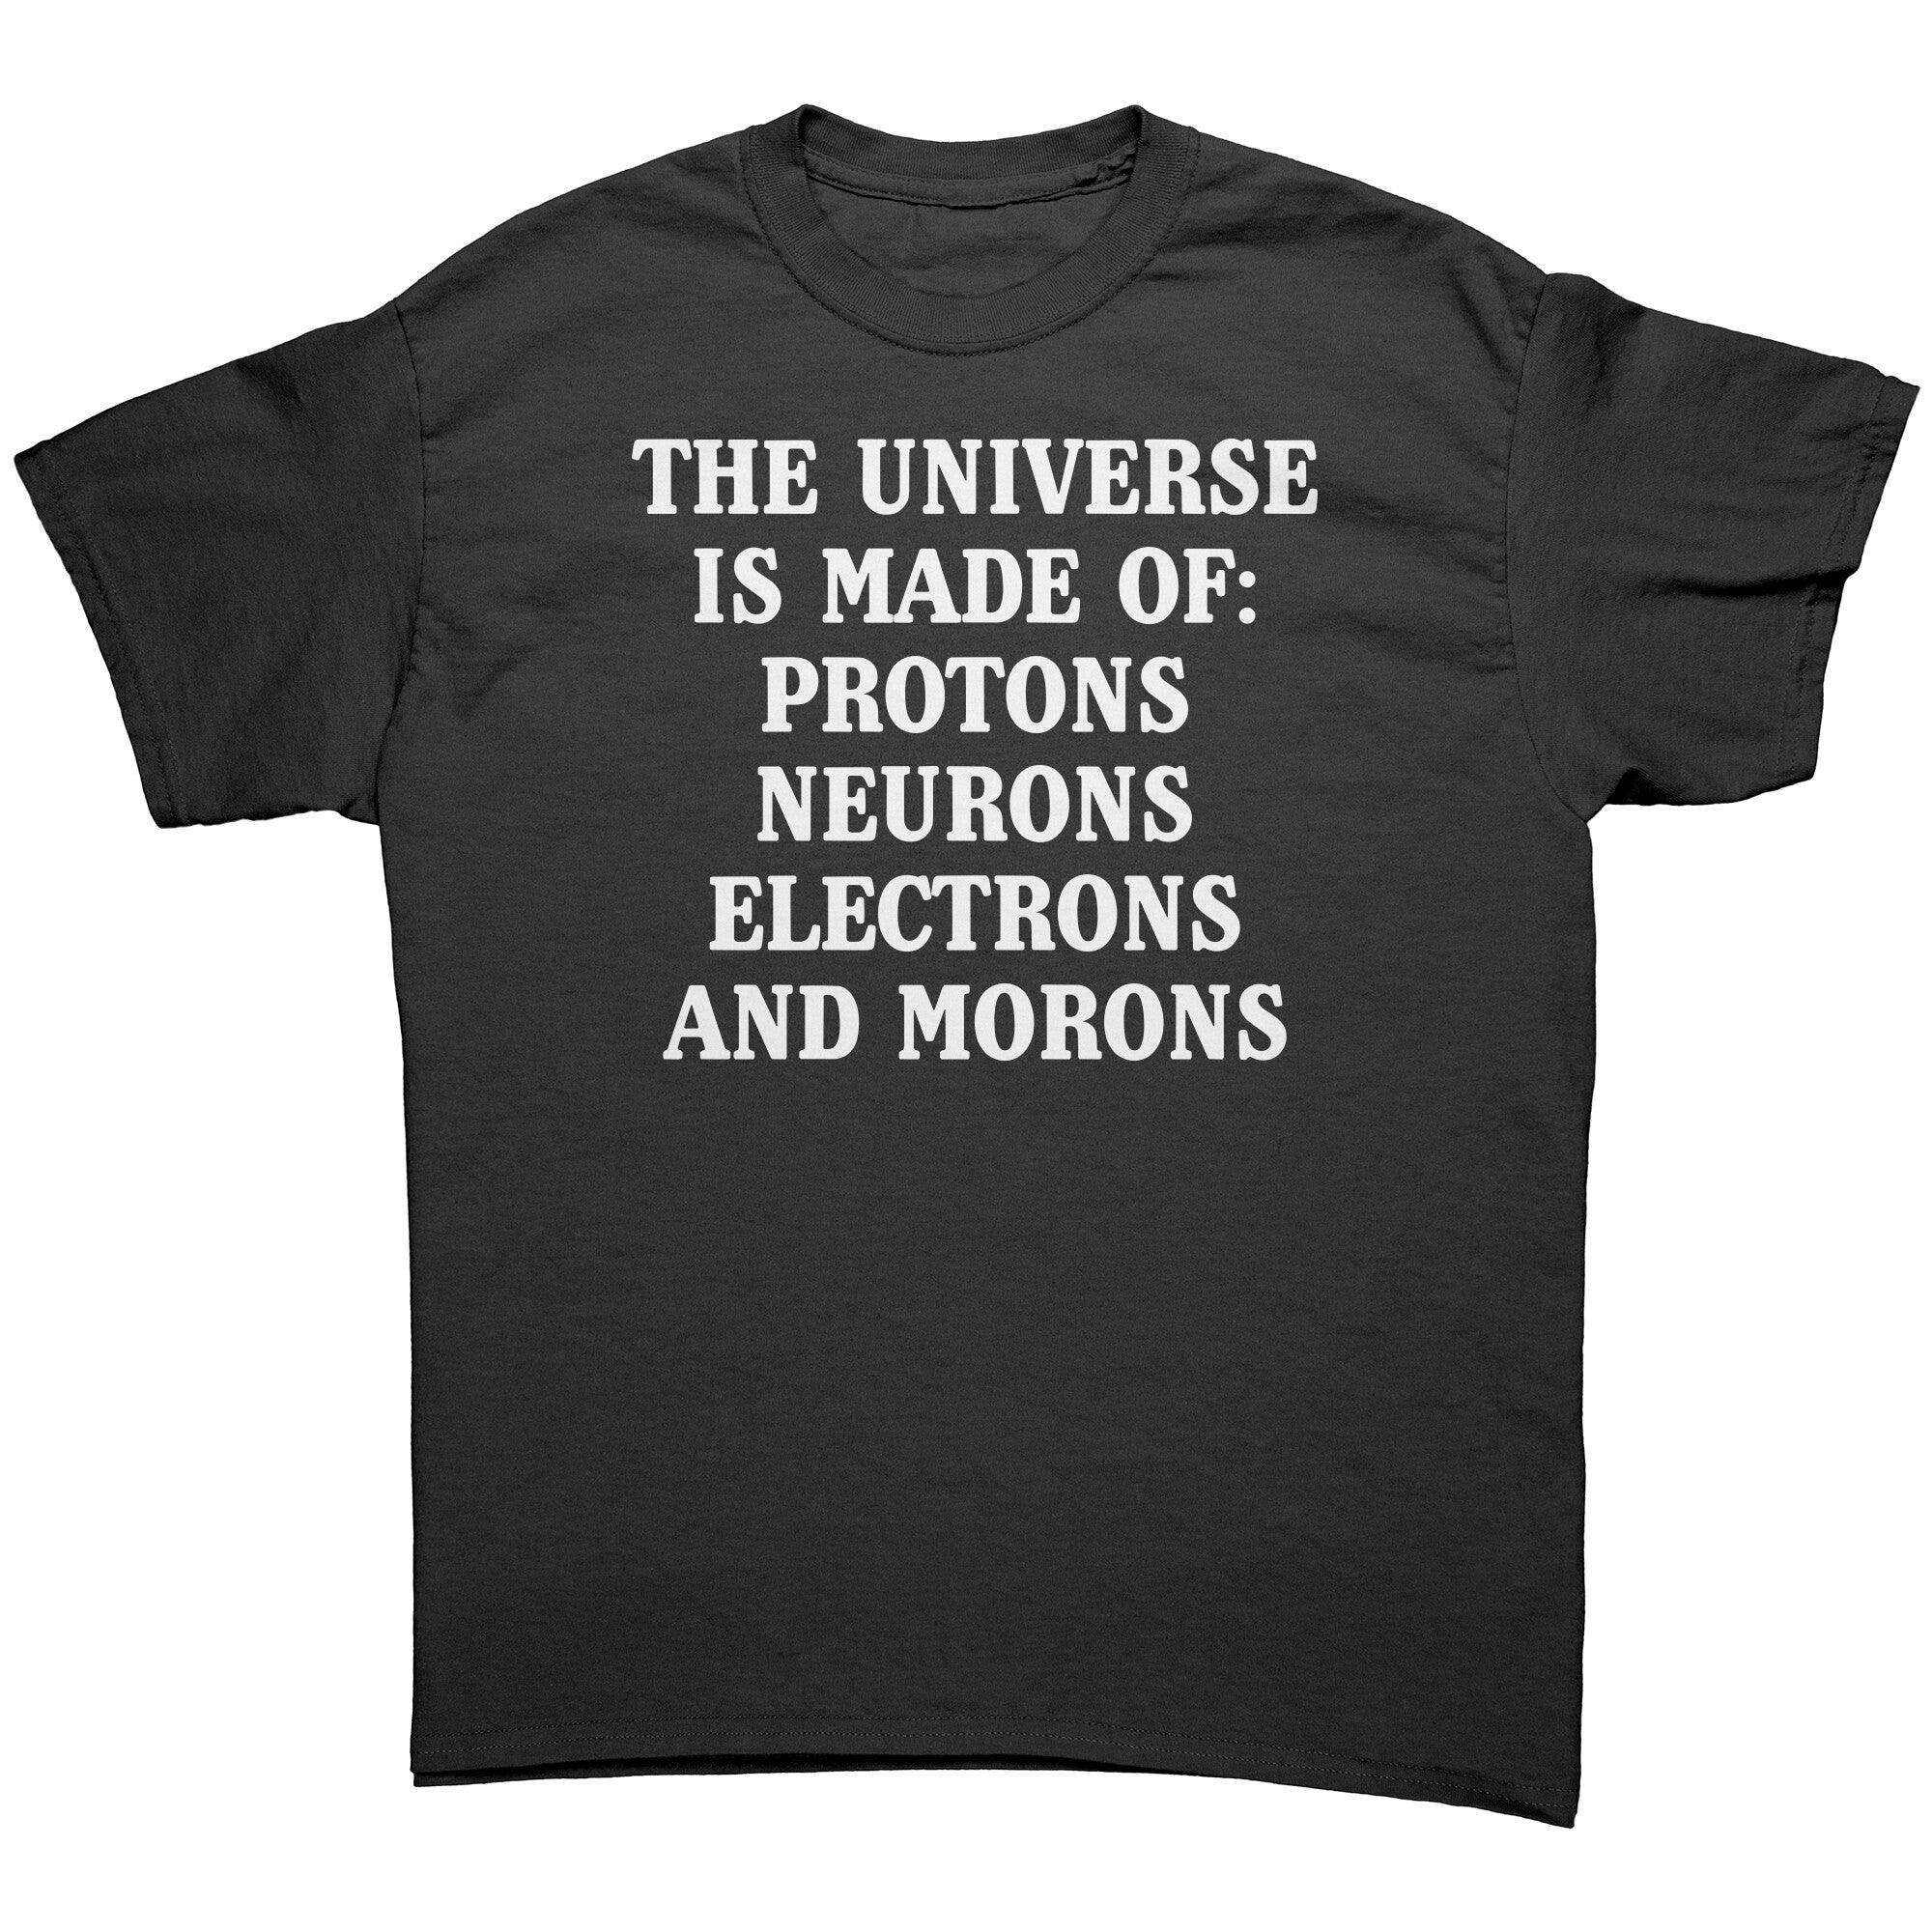 The Universe Is Made Of Protons, Neurons, Electrons, And Morons -Apparel | Drunk America 